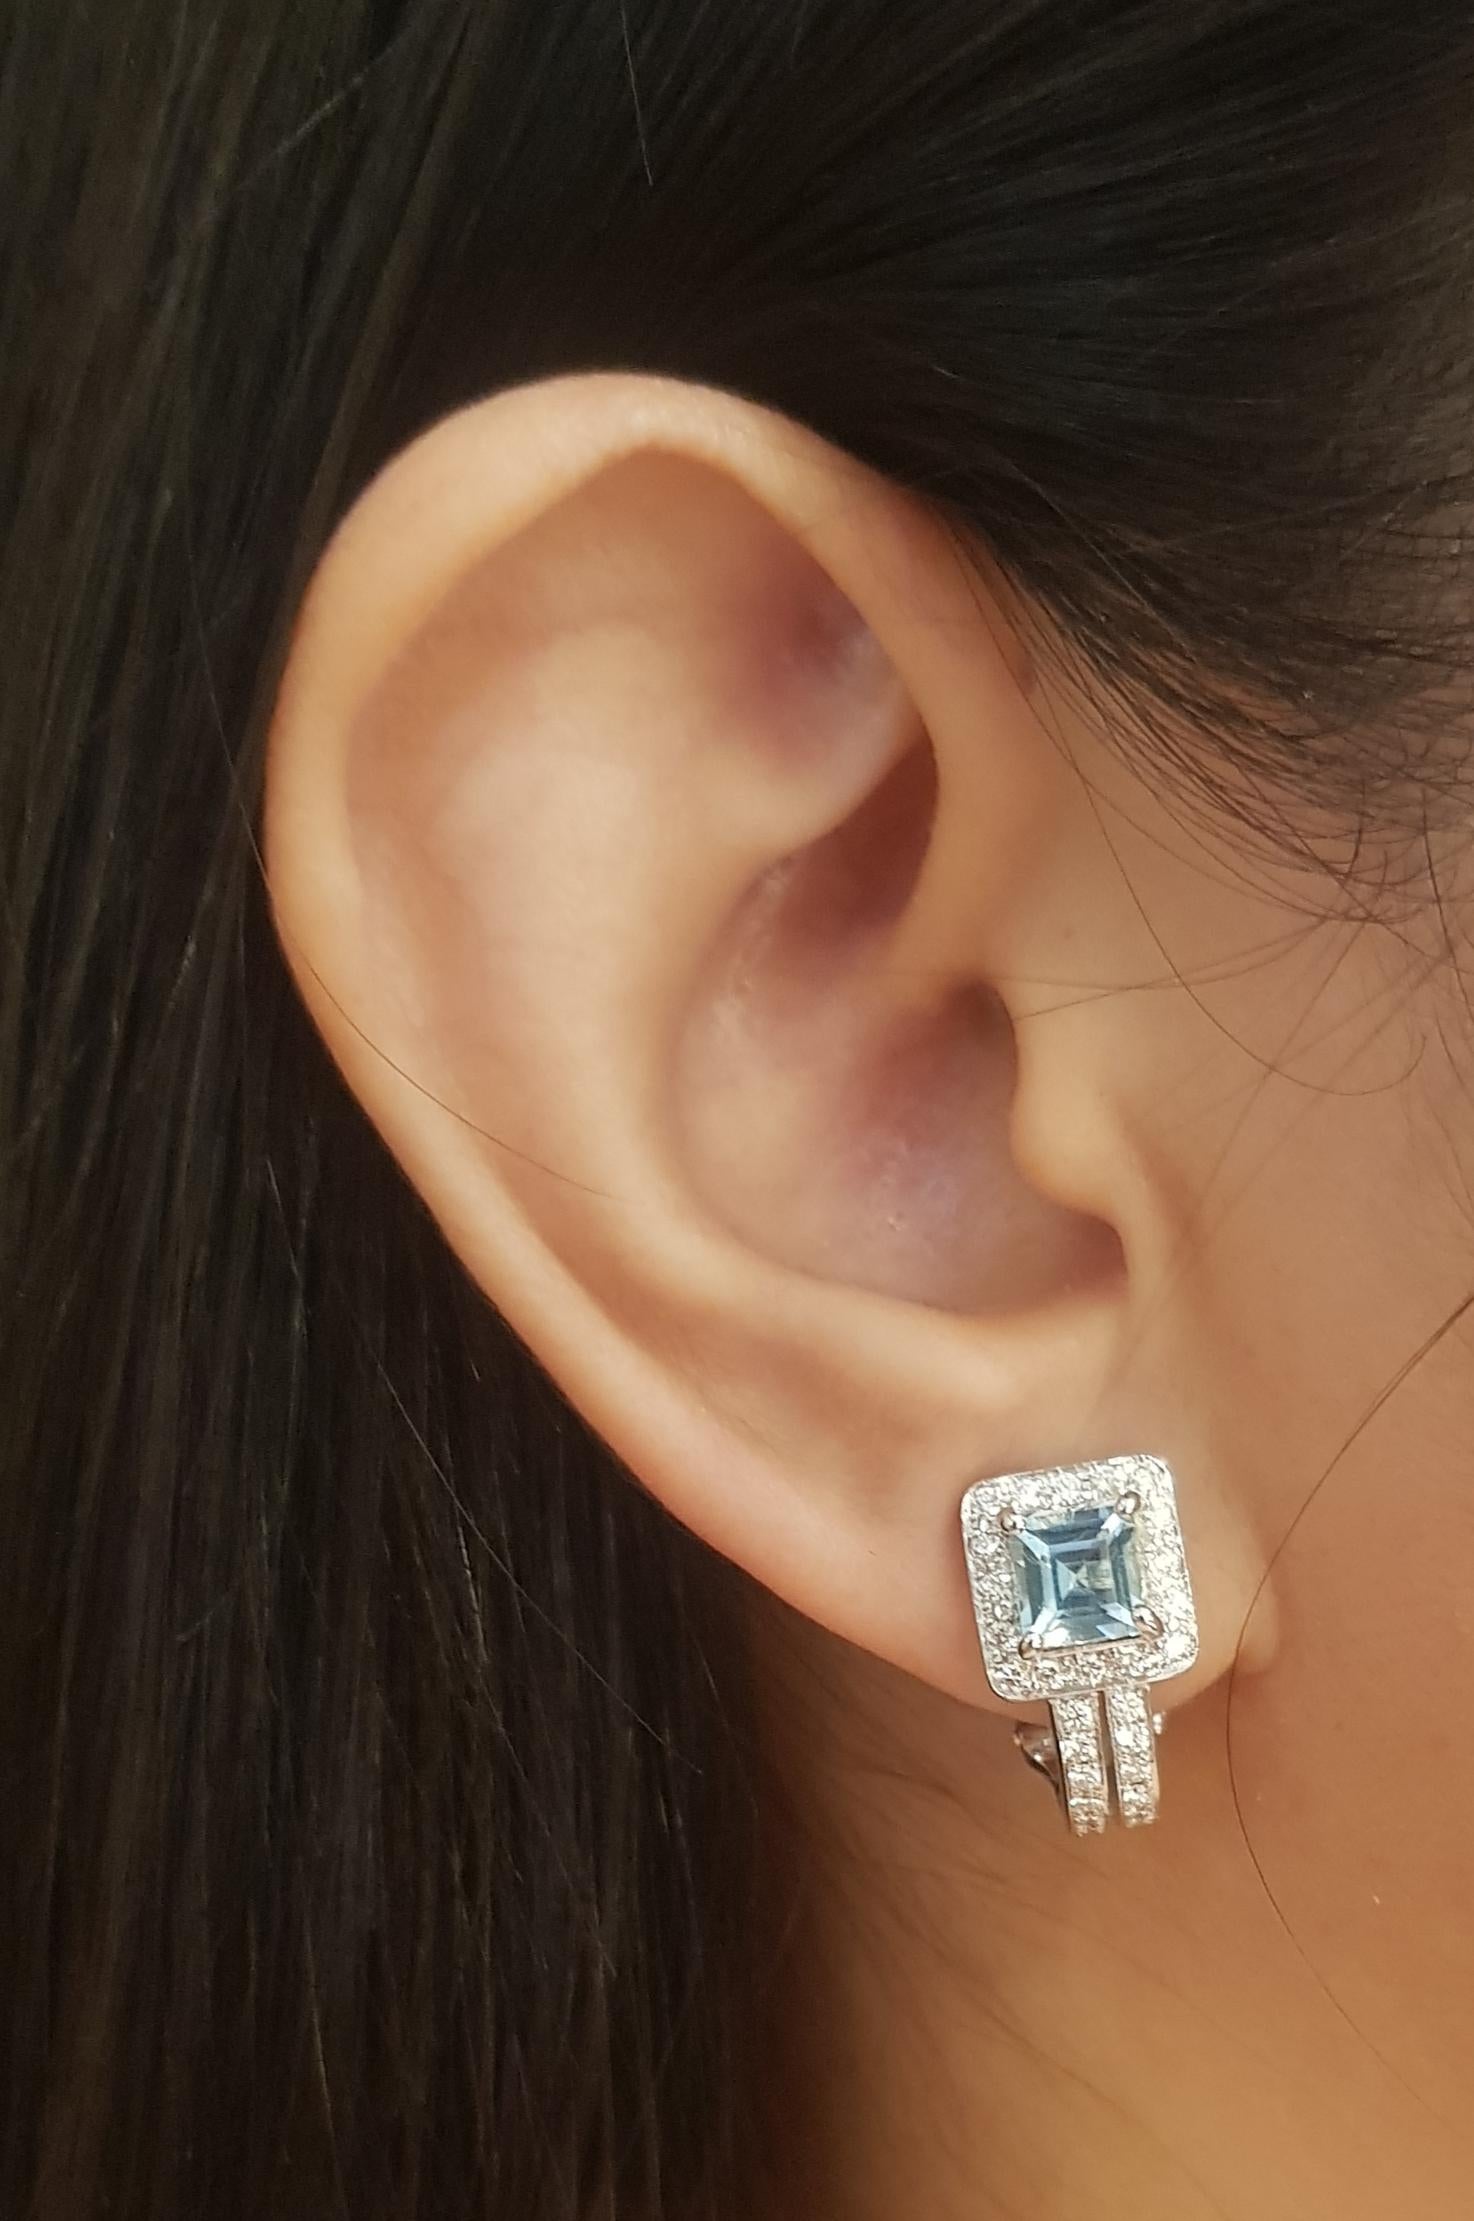 Aquamarine 1.71 carats with Diamond 0.71 carat Earrings set in 18K White Gold Settings

Width: 1.0 cm 
Length: 1.9 cm
Total Weight: 7.97 grams

